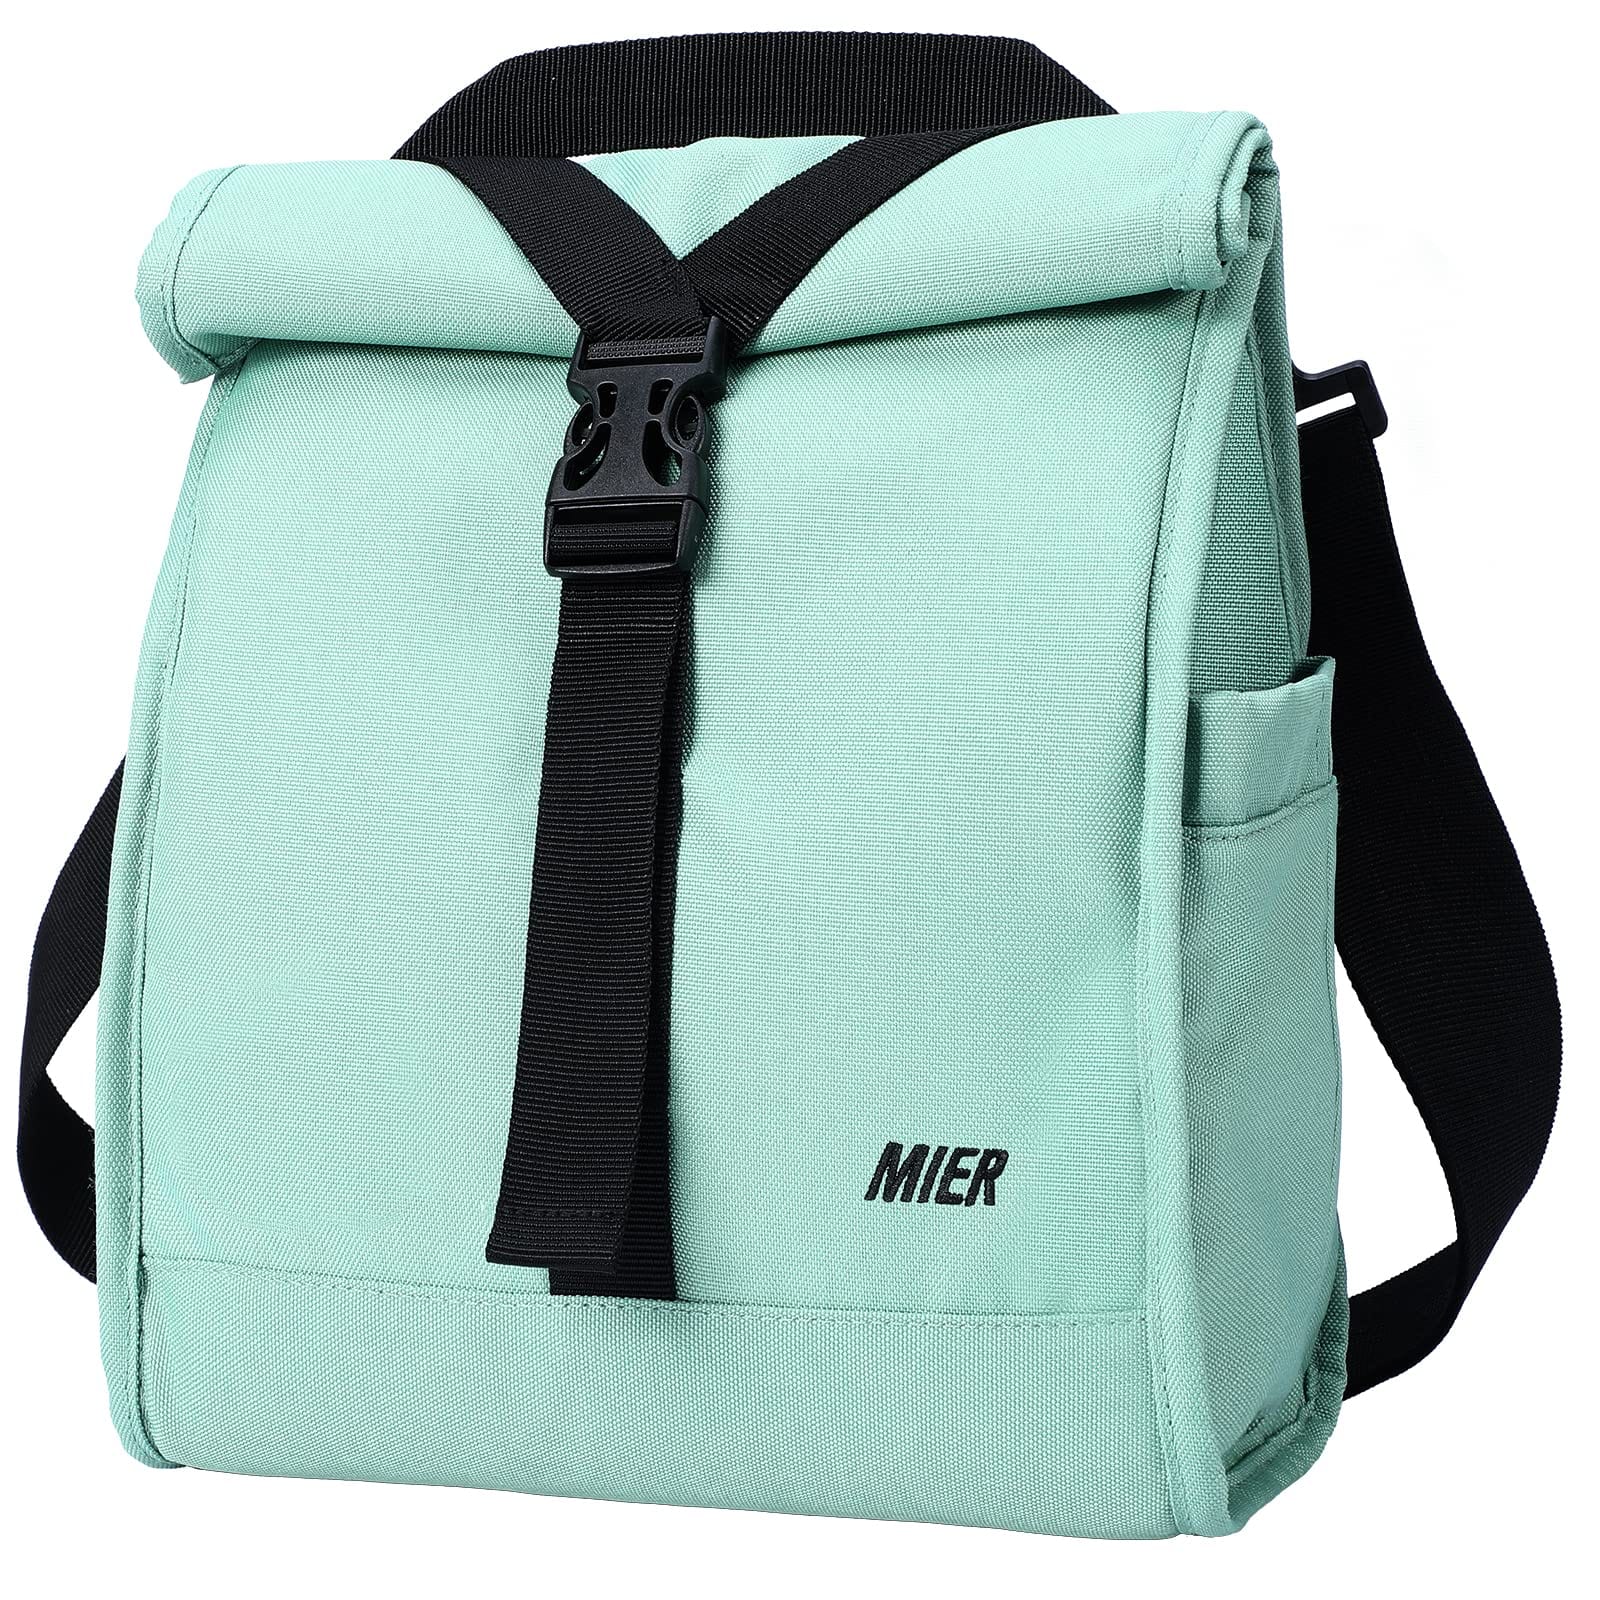 Insulated Lunch Bag Roll Top Lunch Box for Women Men, Green